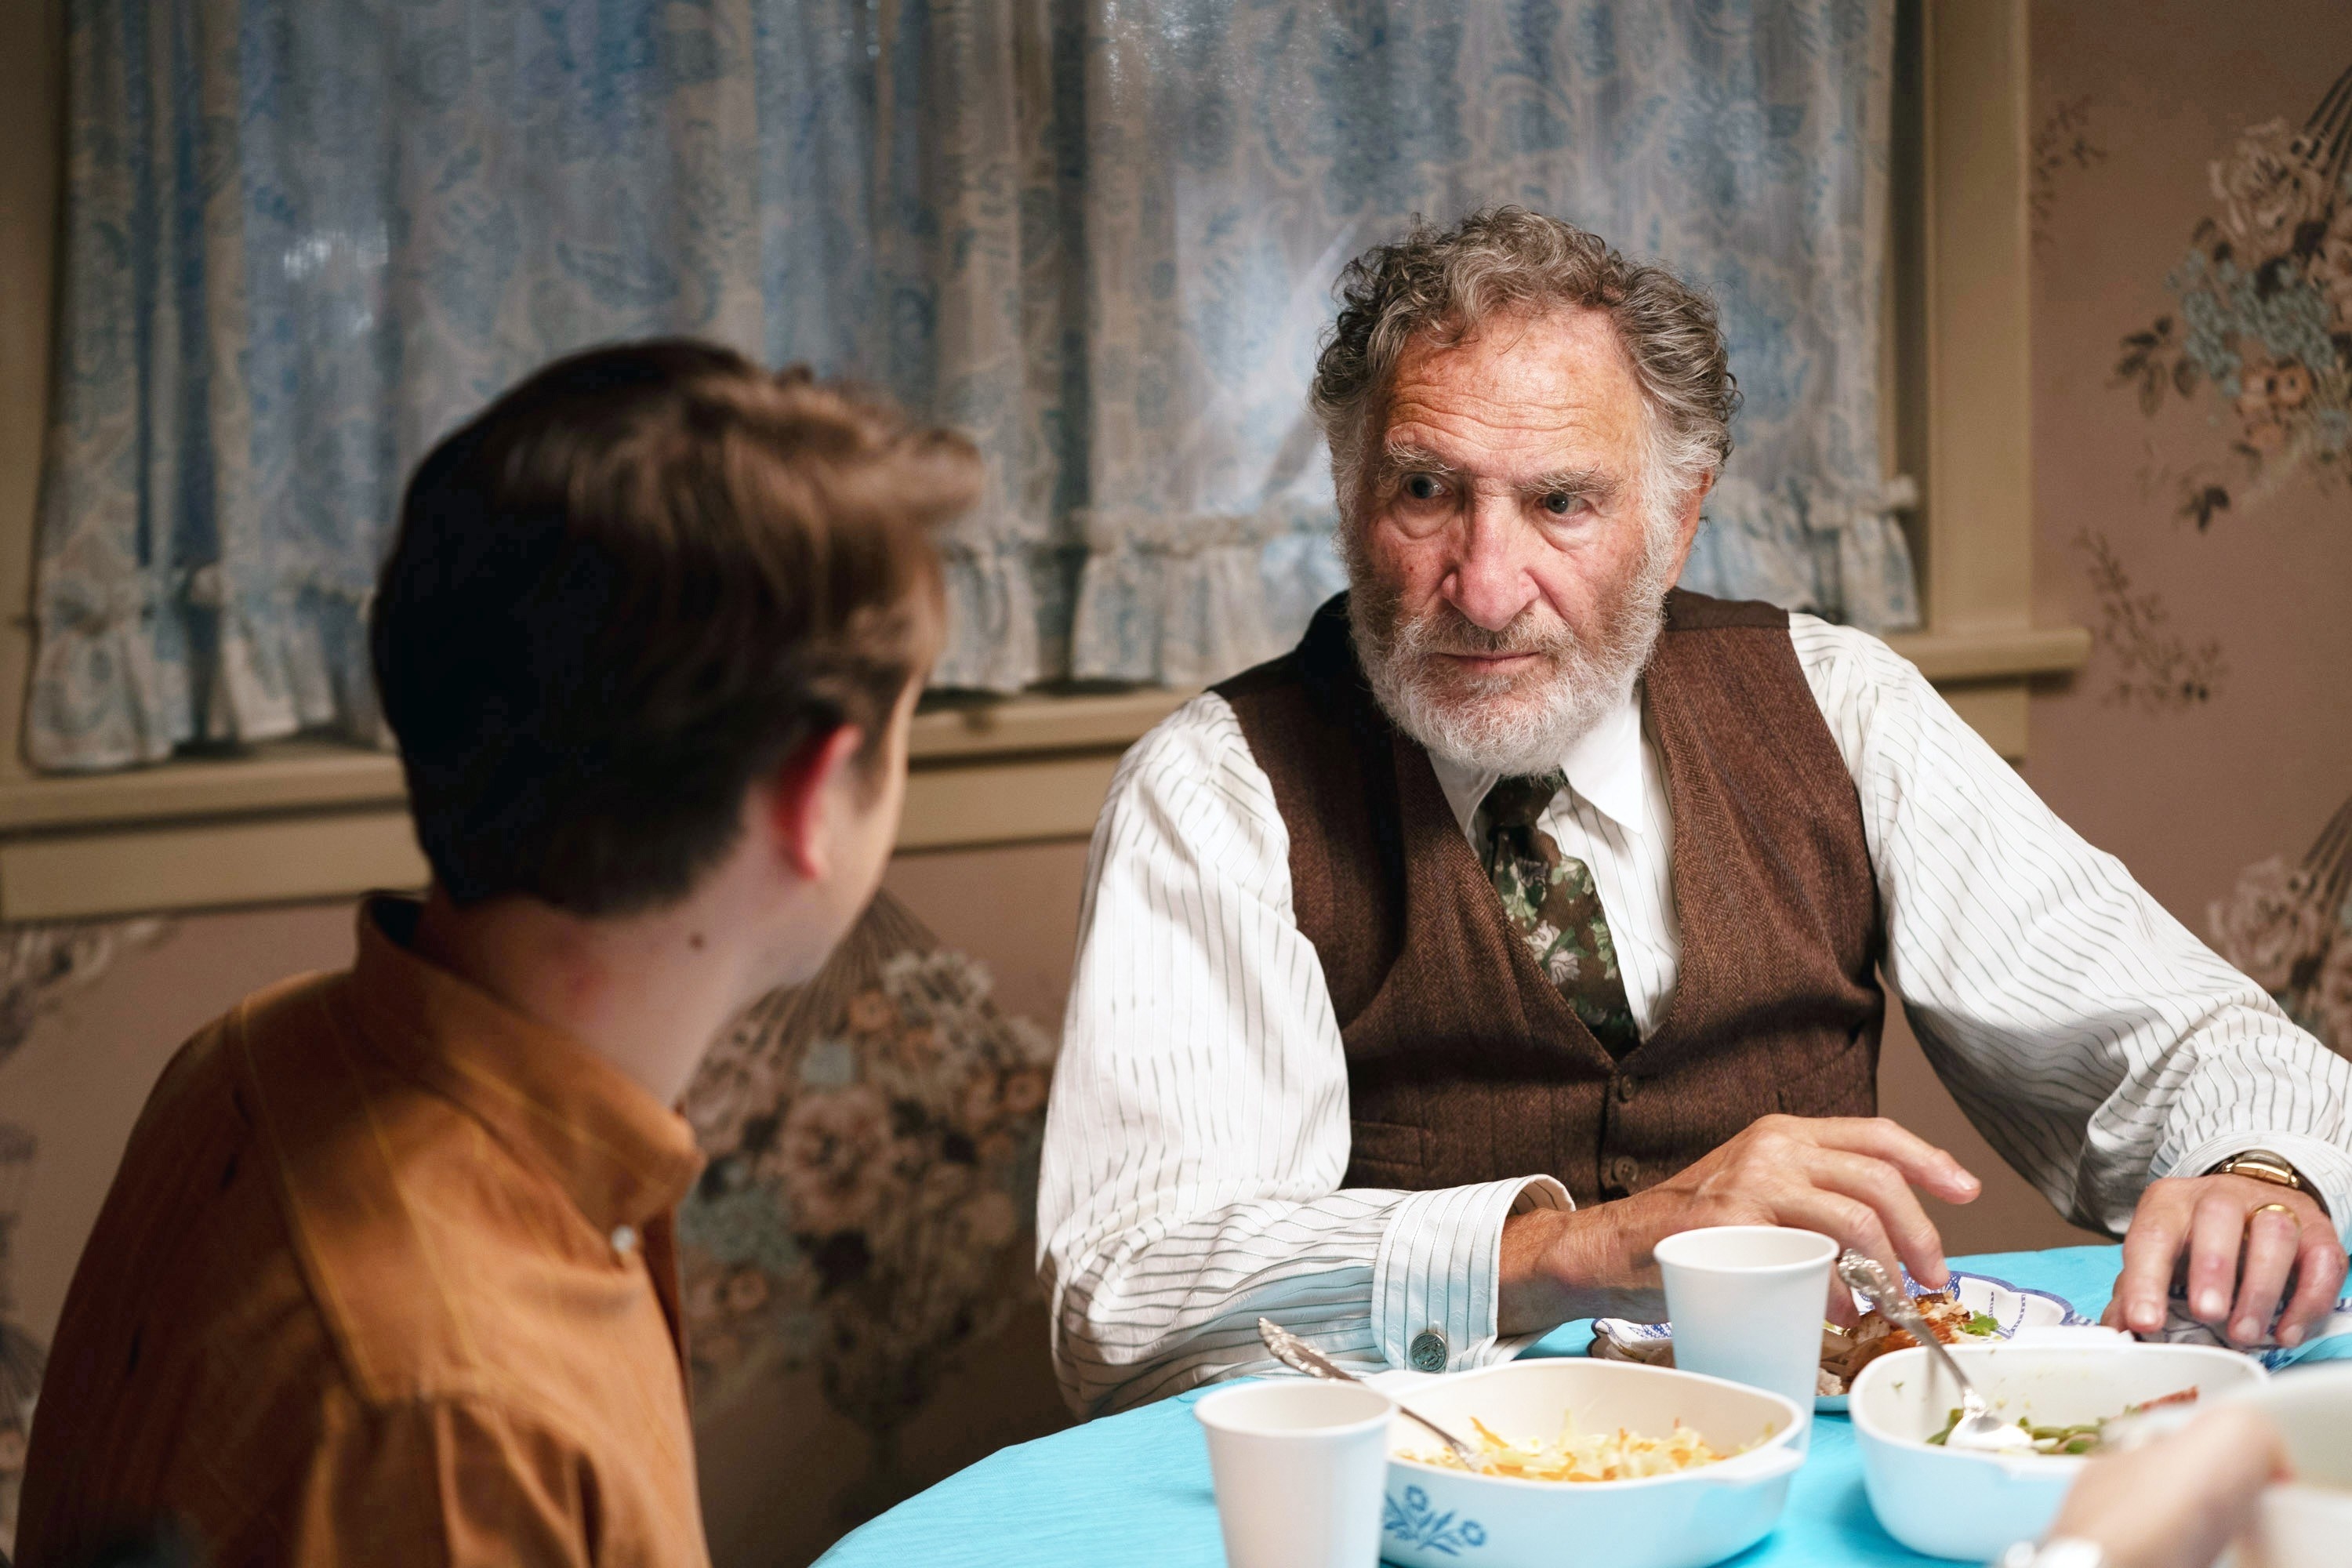 Judd speaking to another person at the dinner table in a scene from The Fabelmans